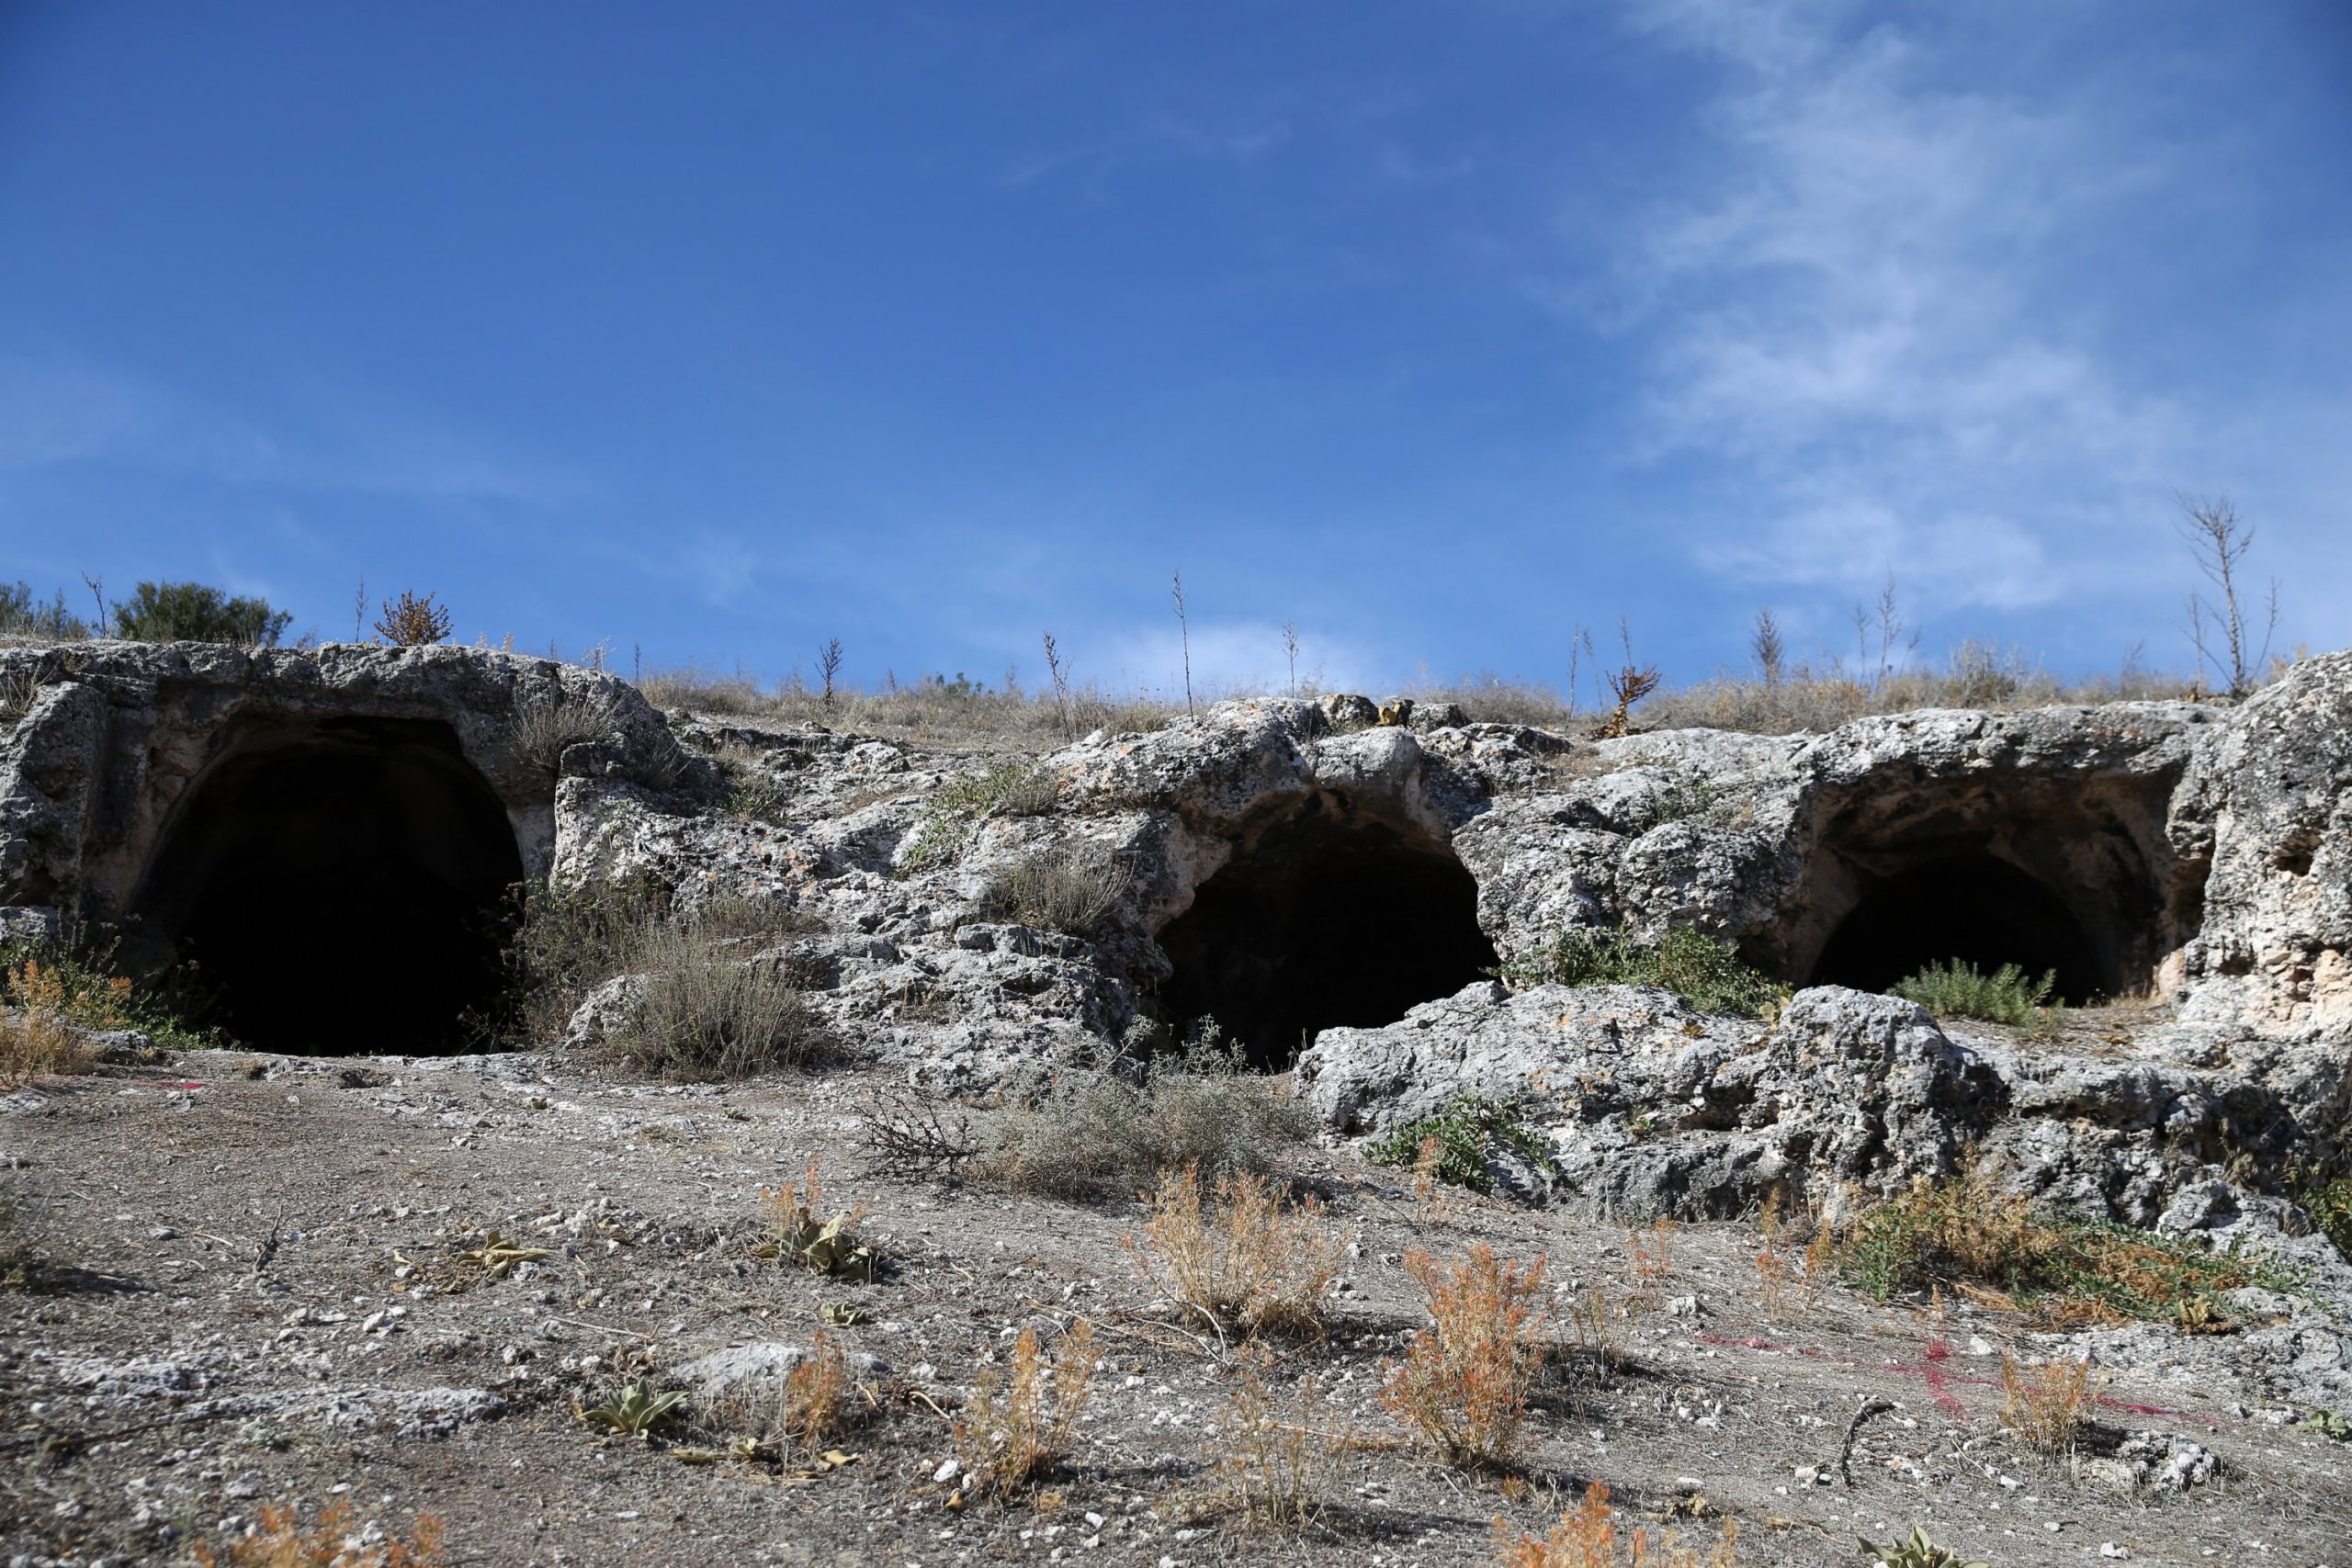 400 rock-cut tombs found in the ancient city of Blaundus in Turkey